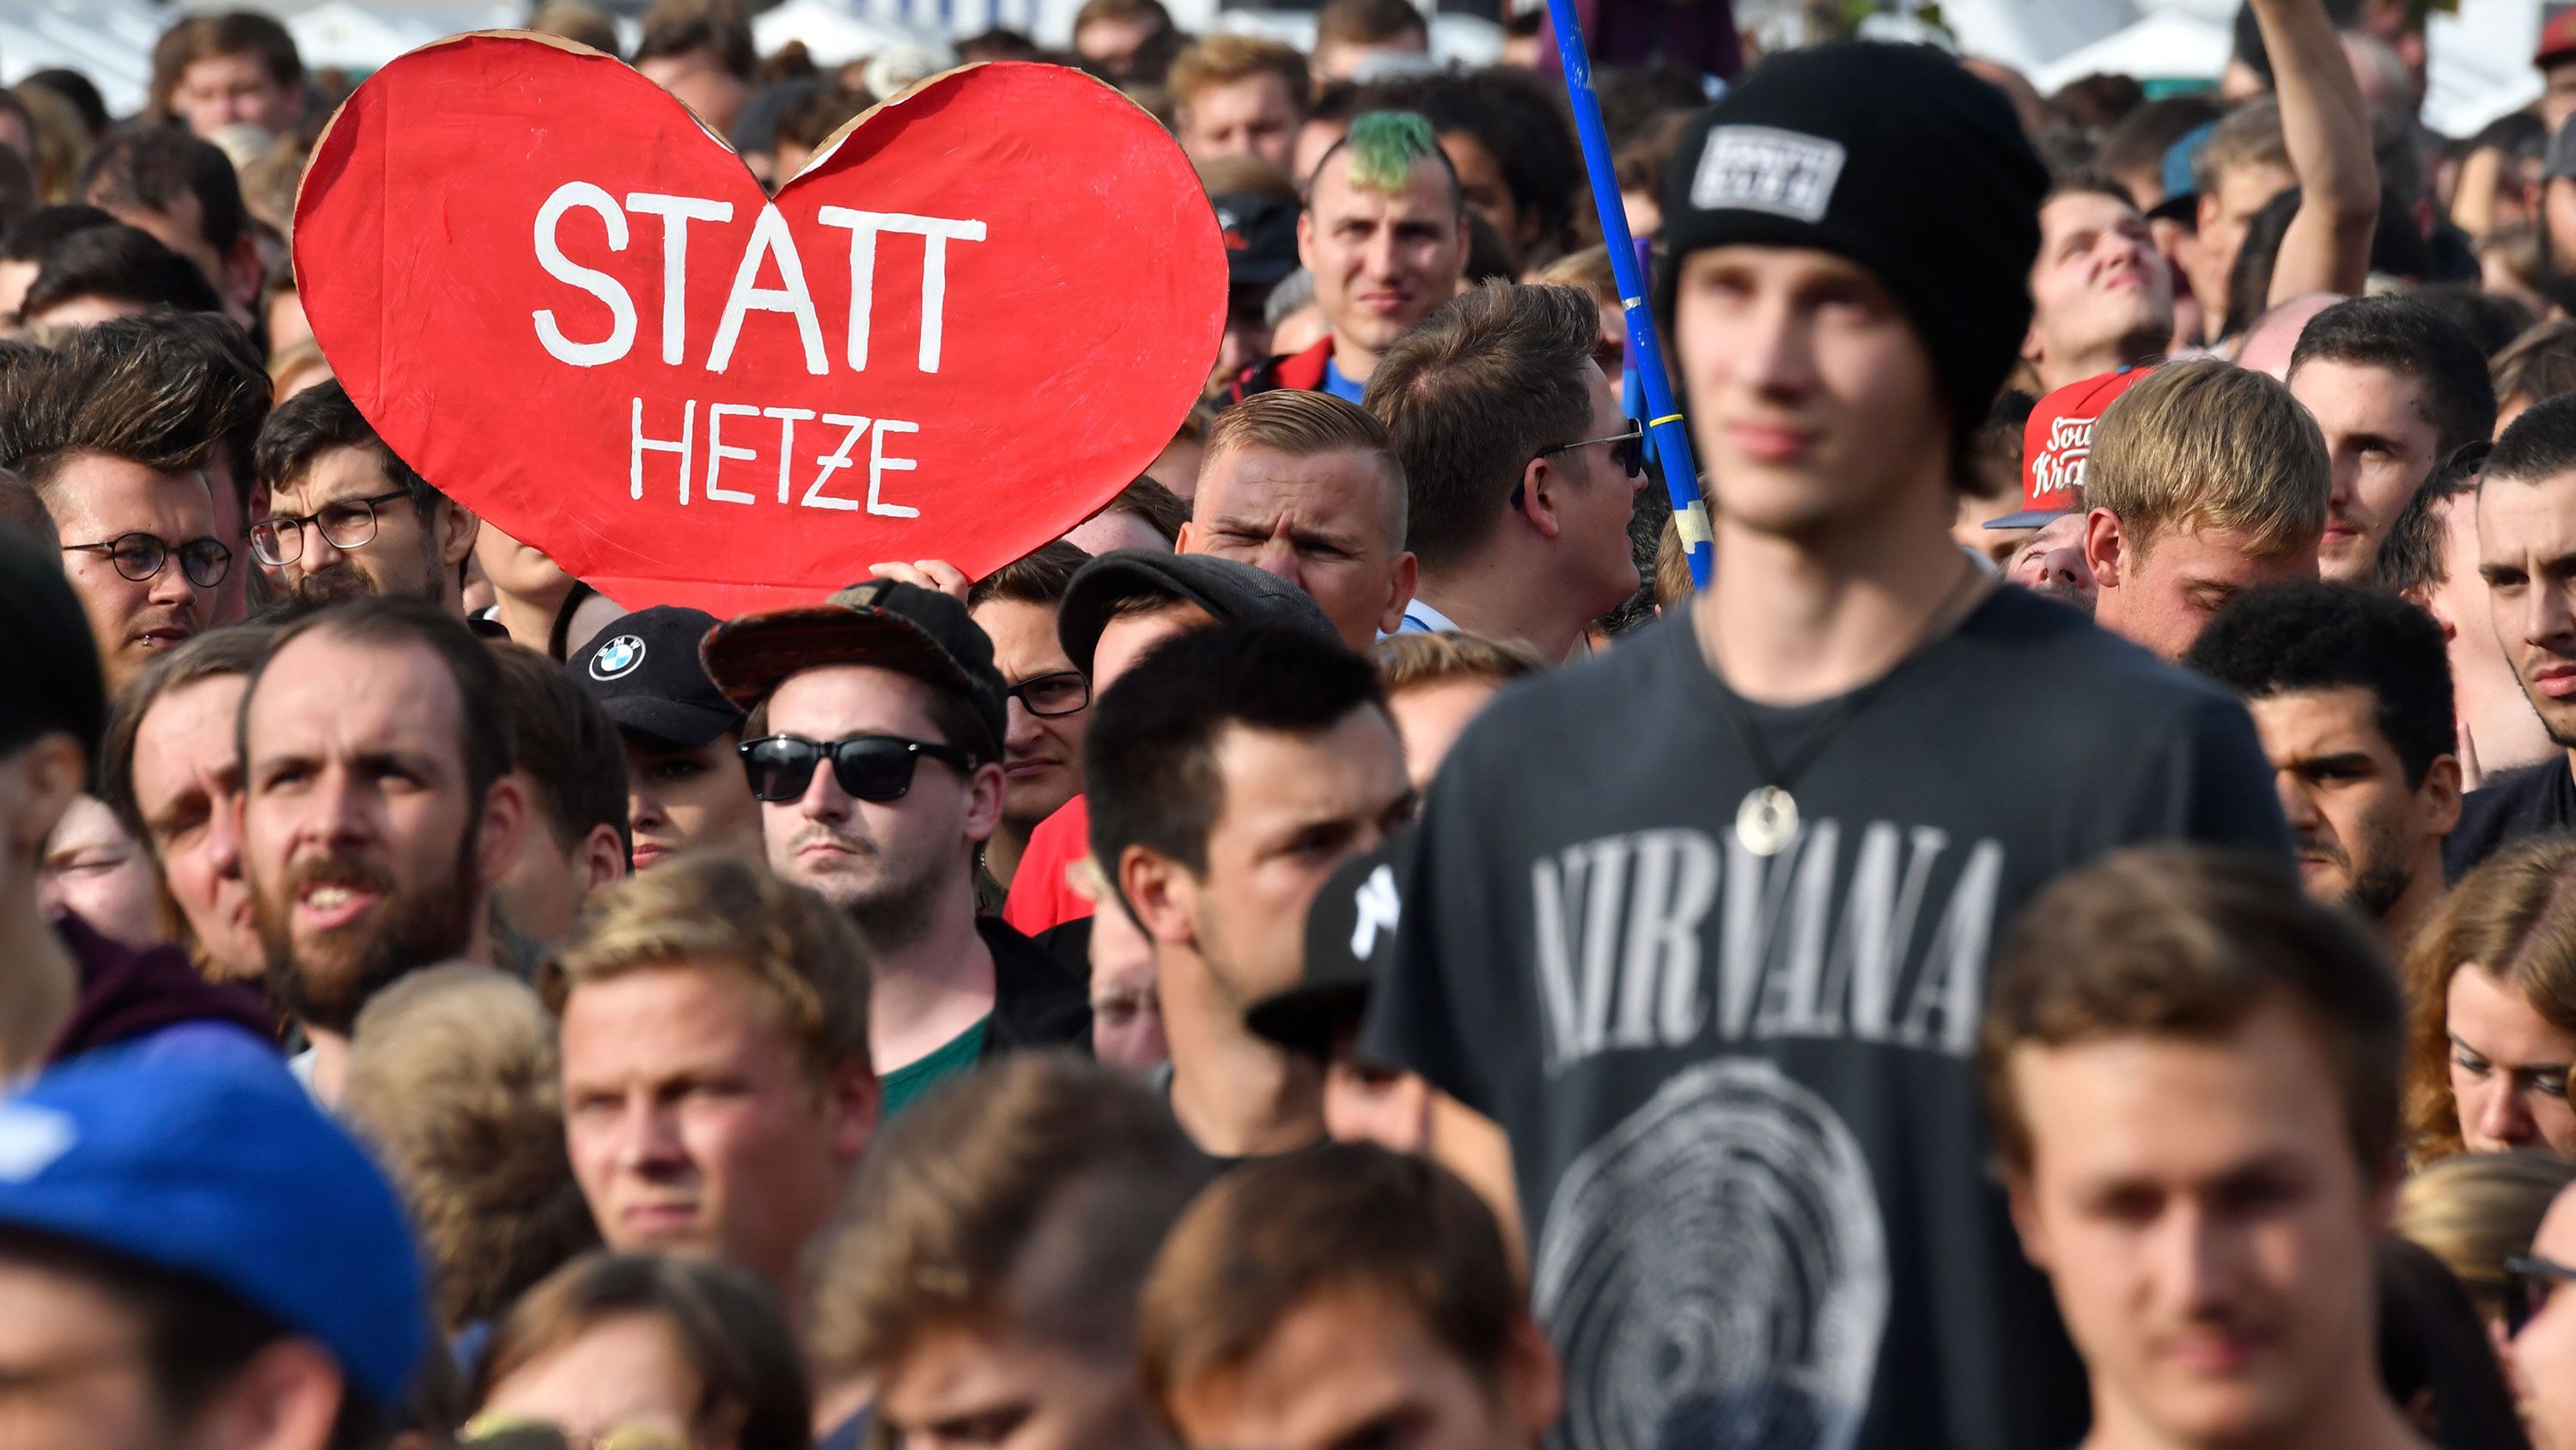 A crowd member holds a sign reading "Instead of hate" at the concert in Chemnitz.